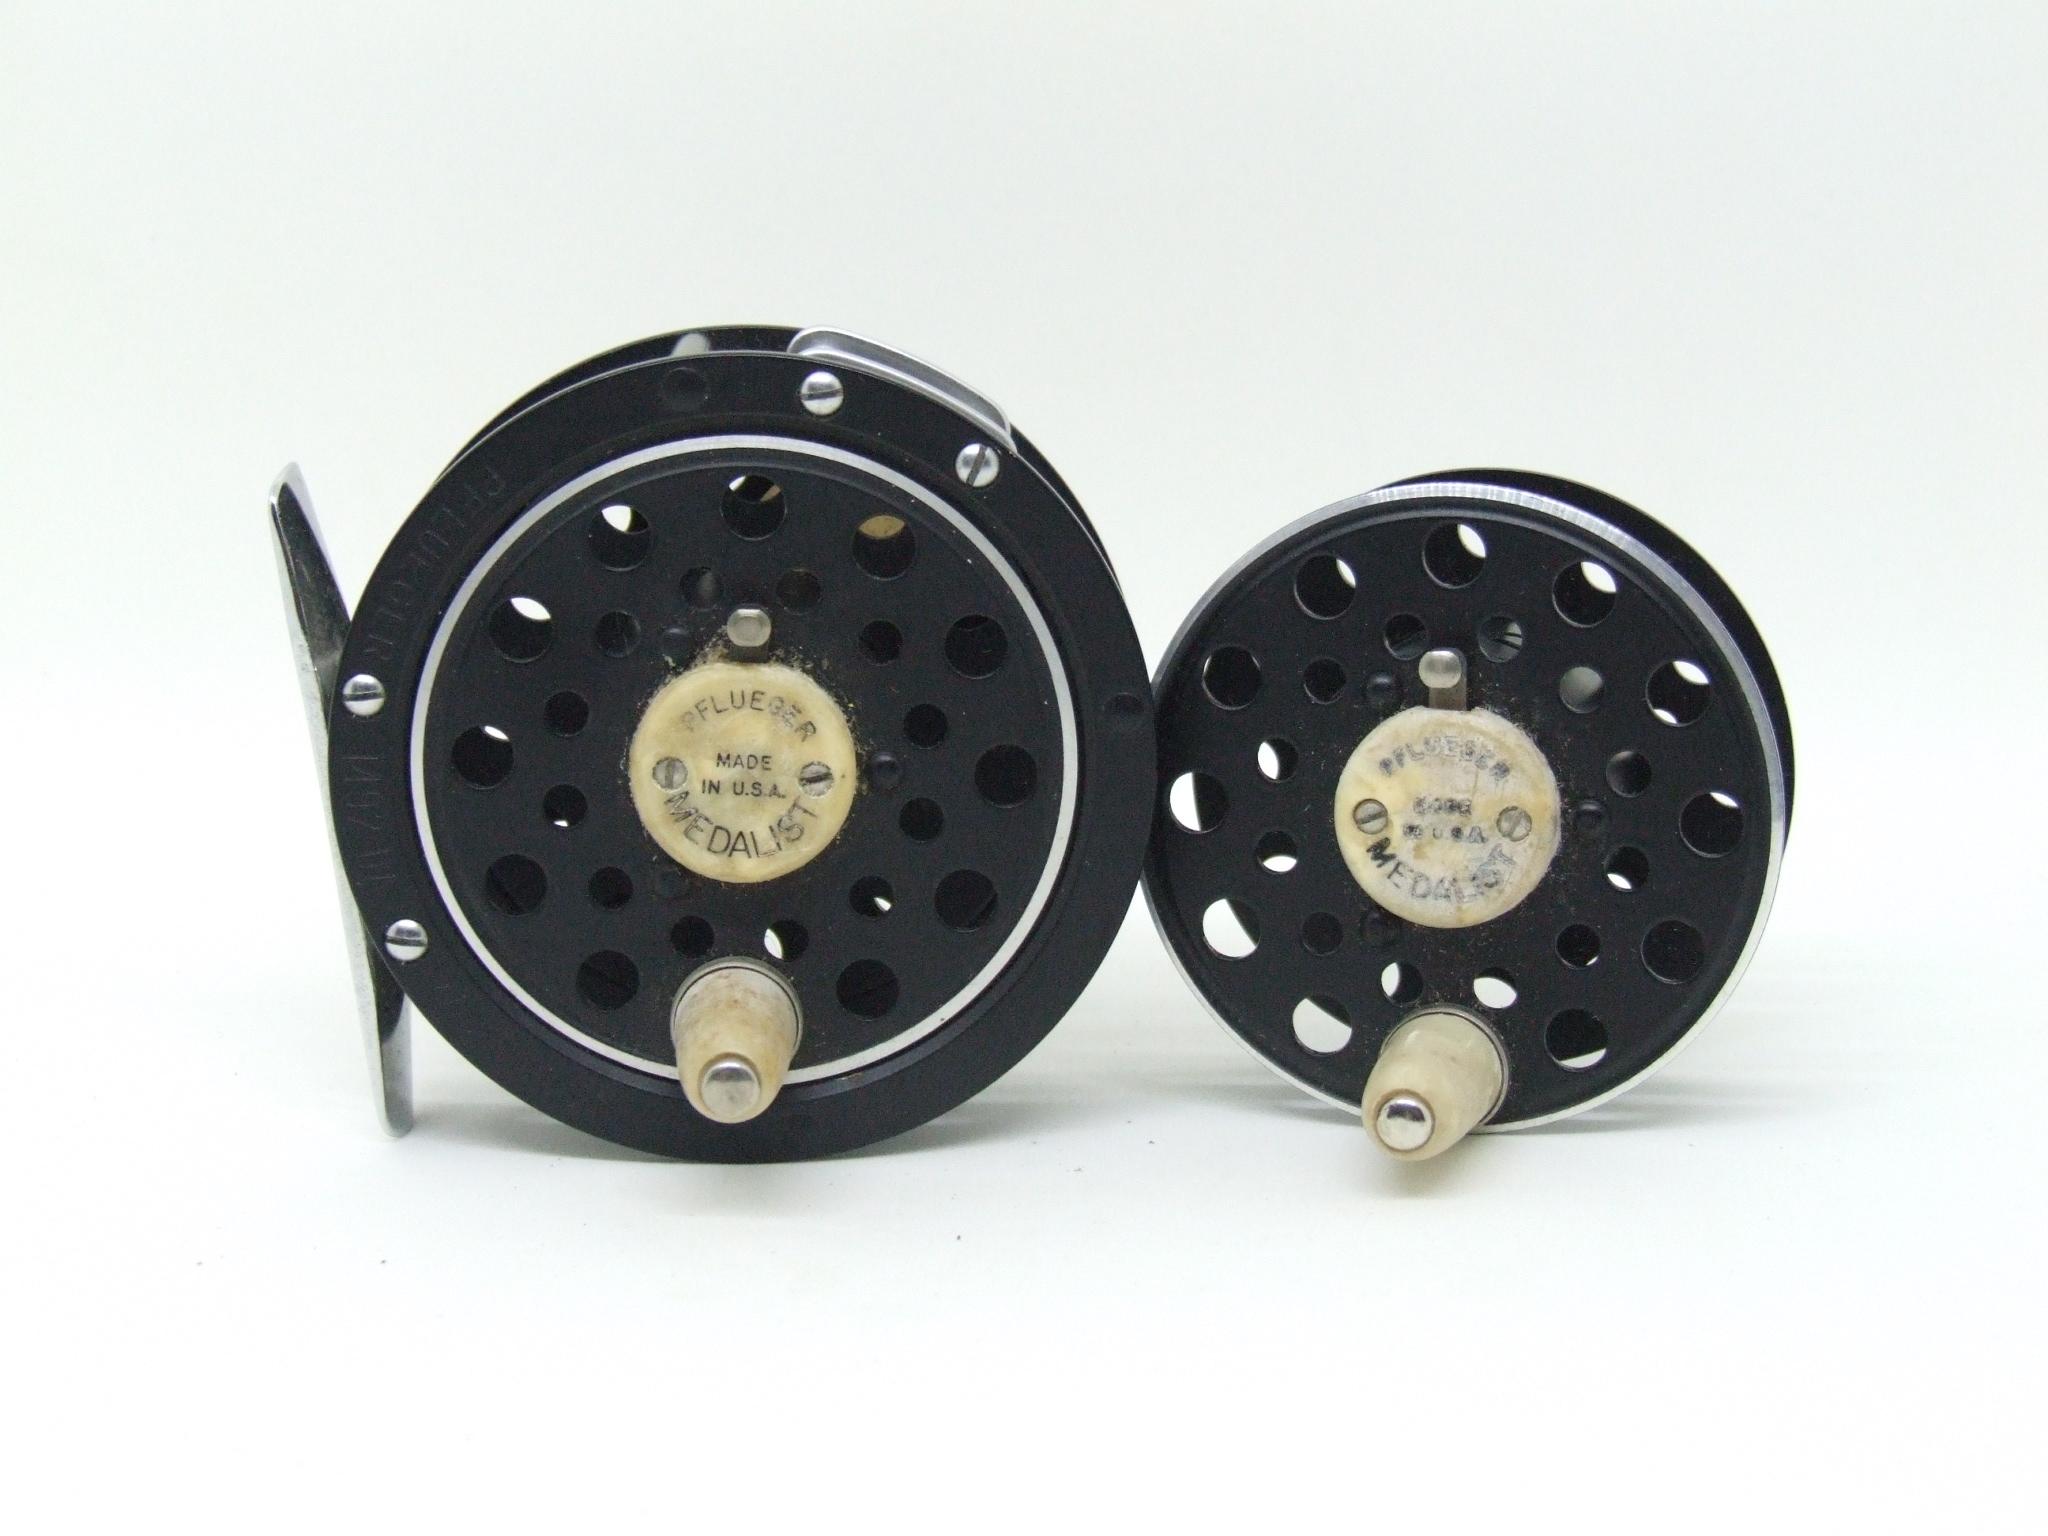 Other Reels